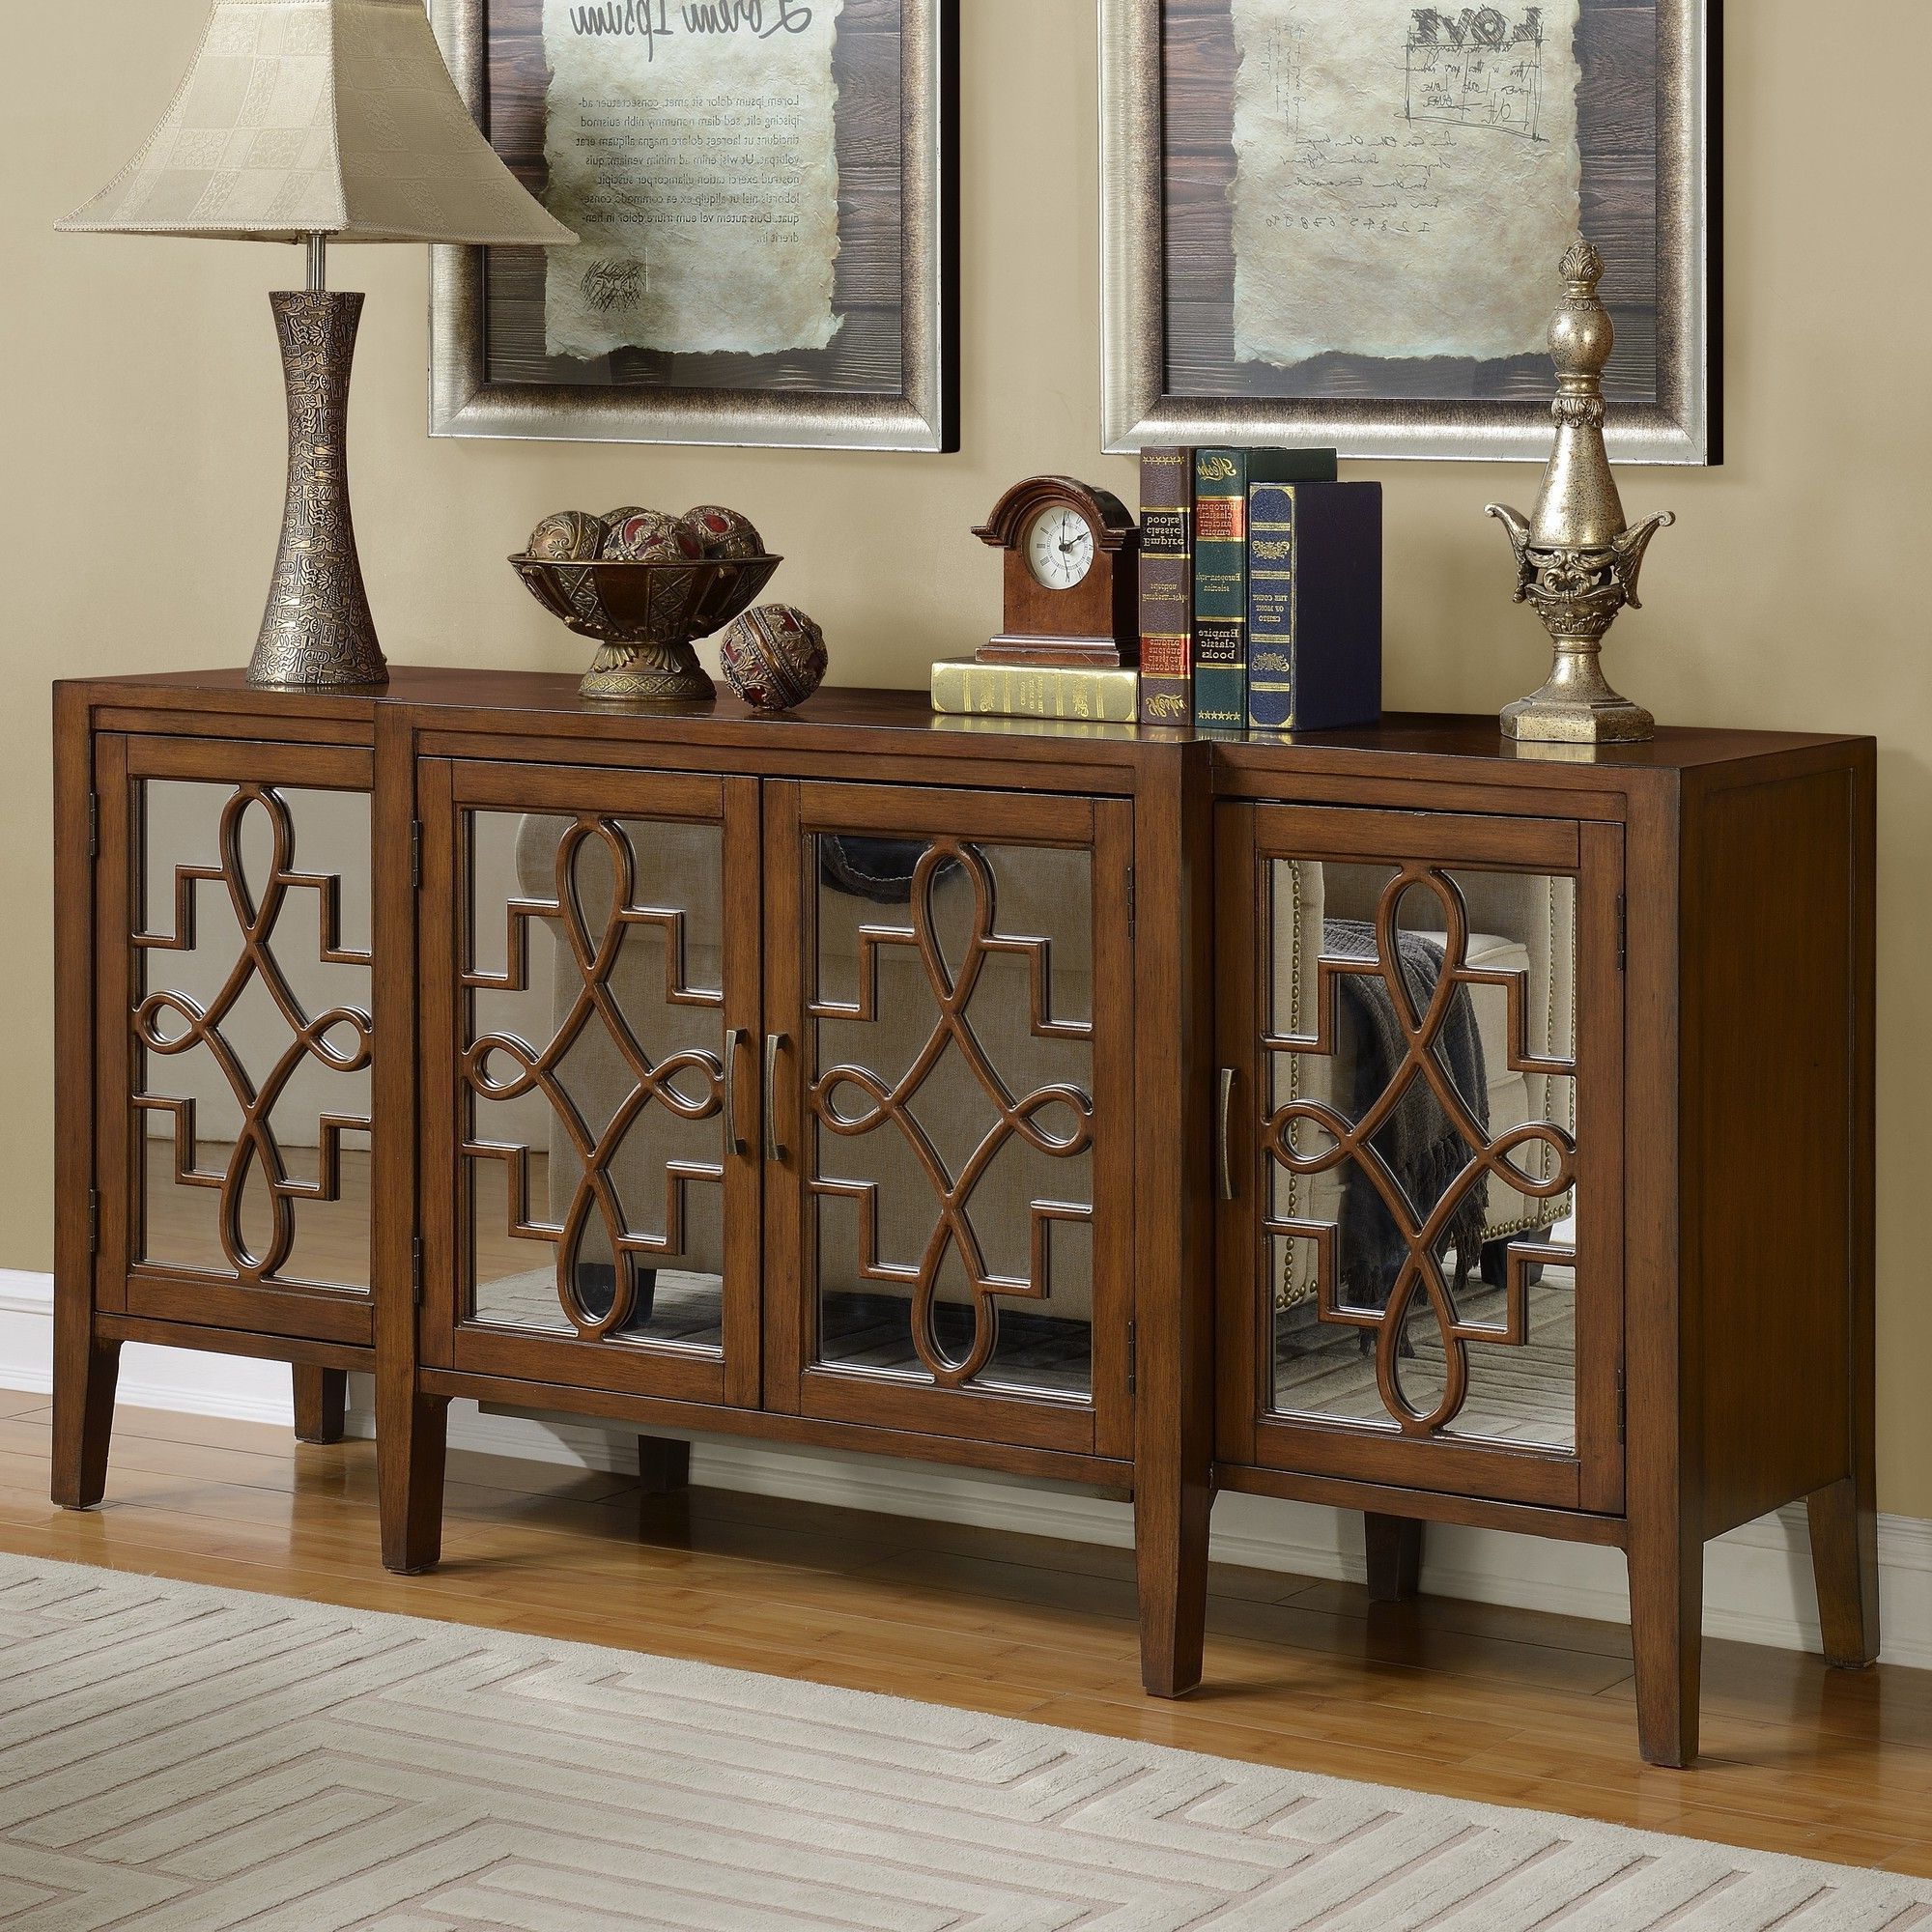 Manry Credenza | Products | Sideboard, Sideboard Buffet With Regard To Stillwater Sideboards (View 12 of 20)